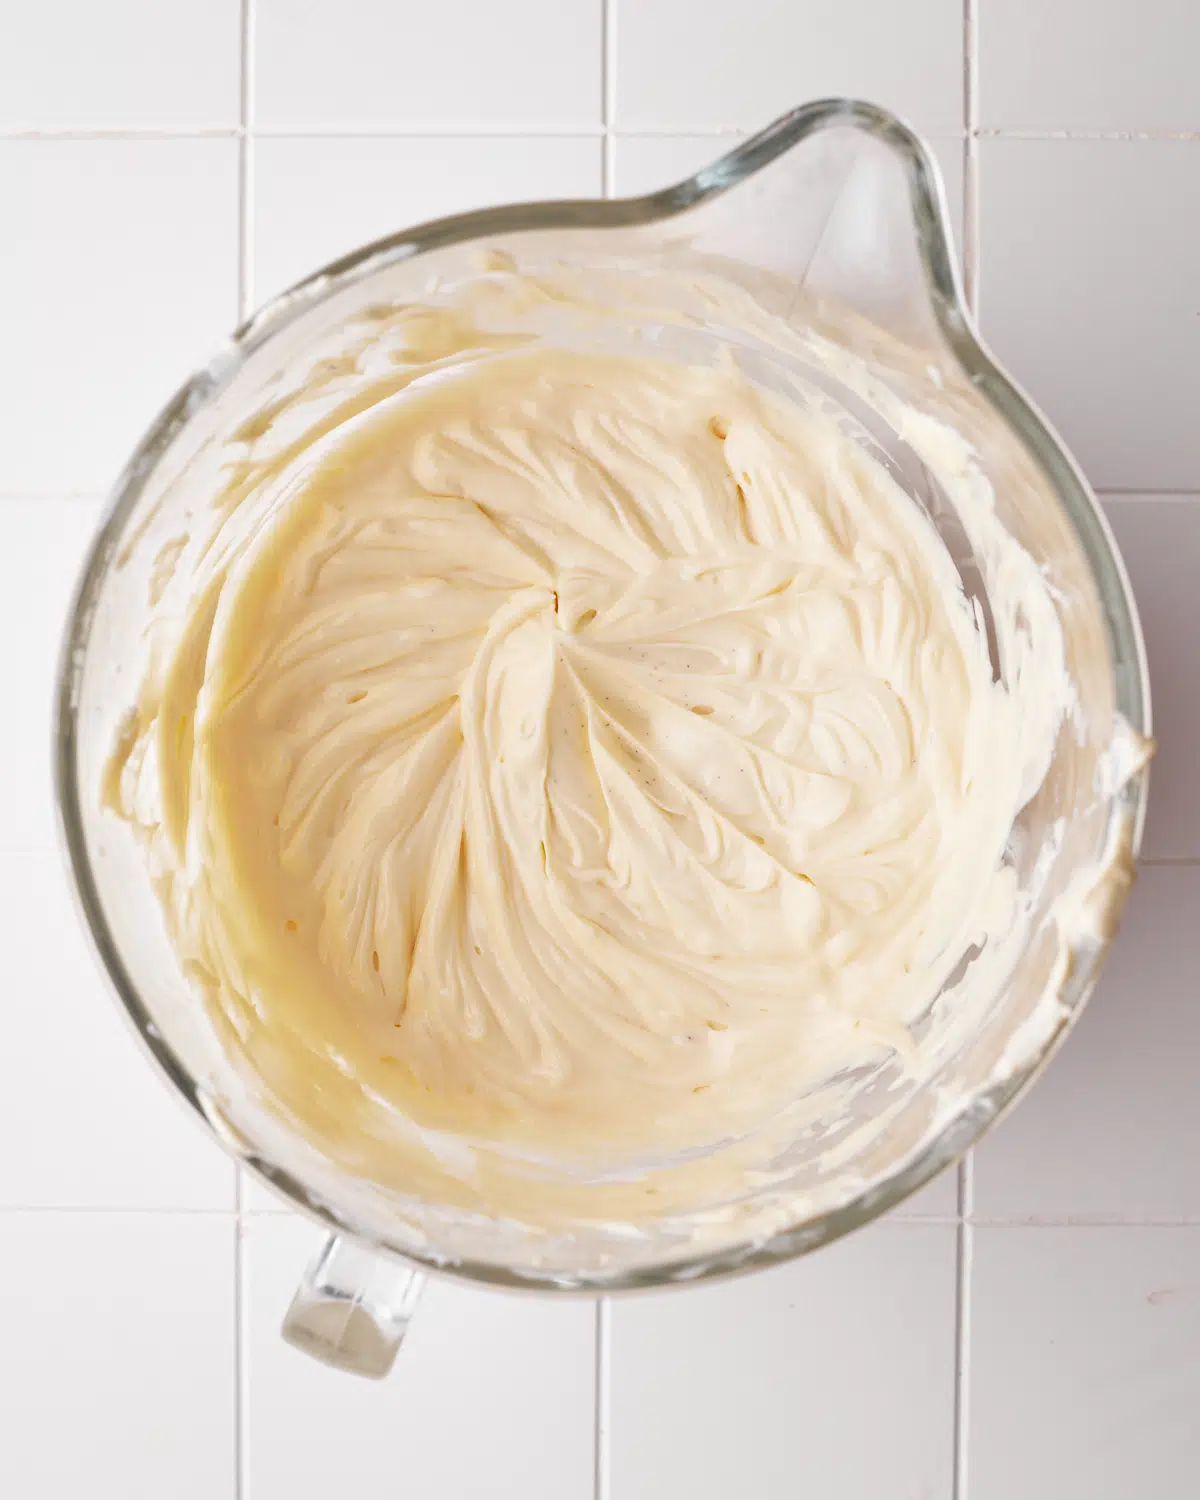 smooth, creamy cheesecake batter.